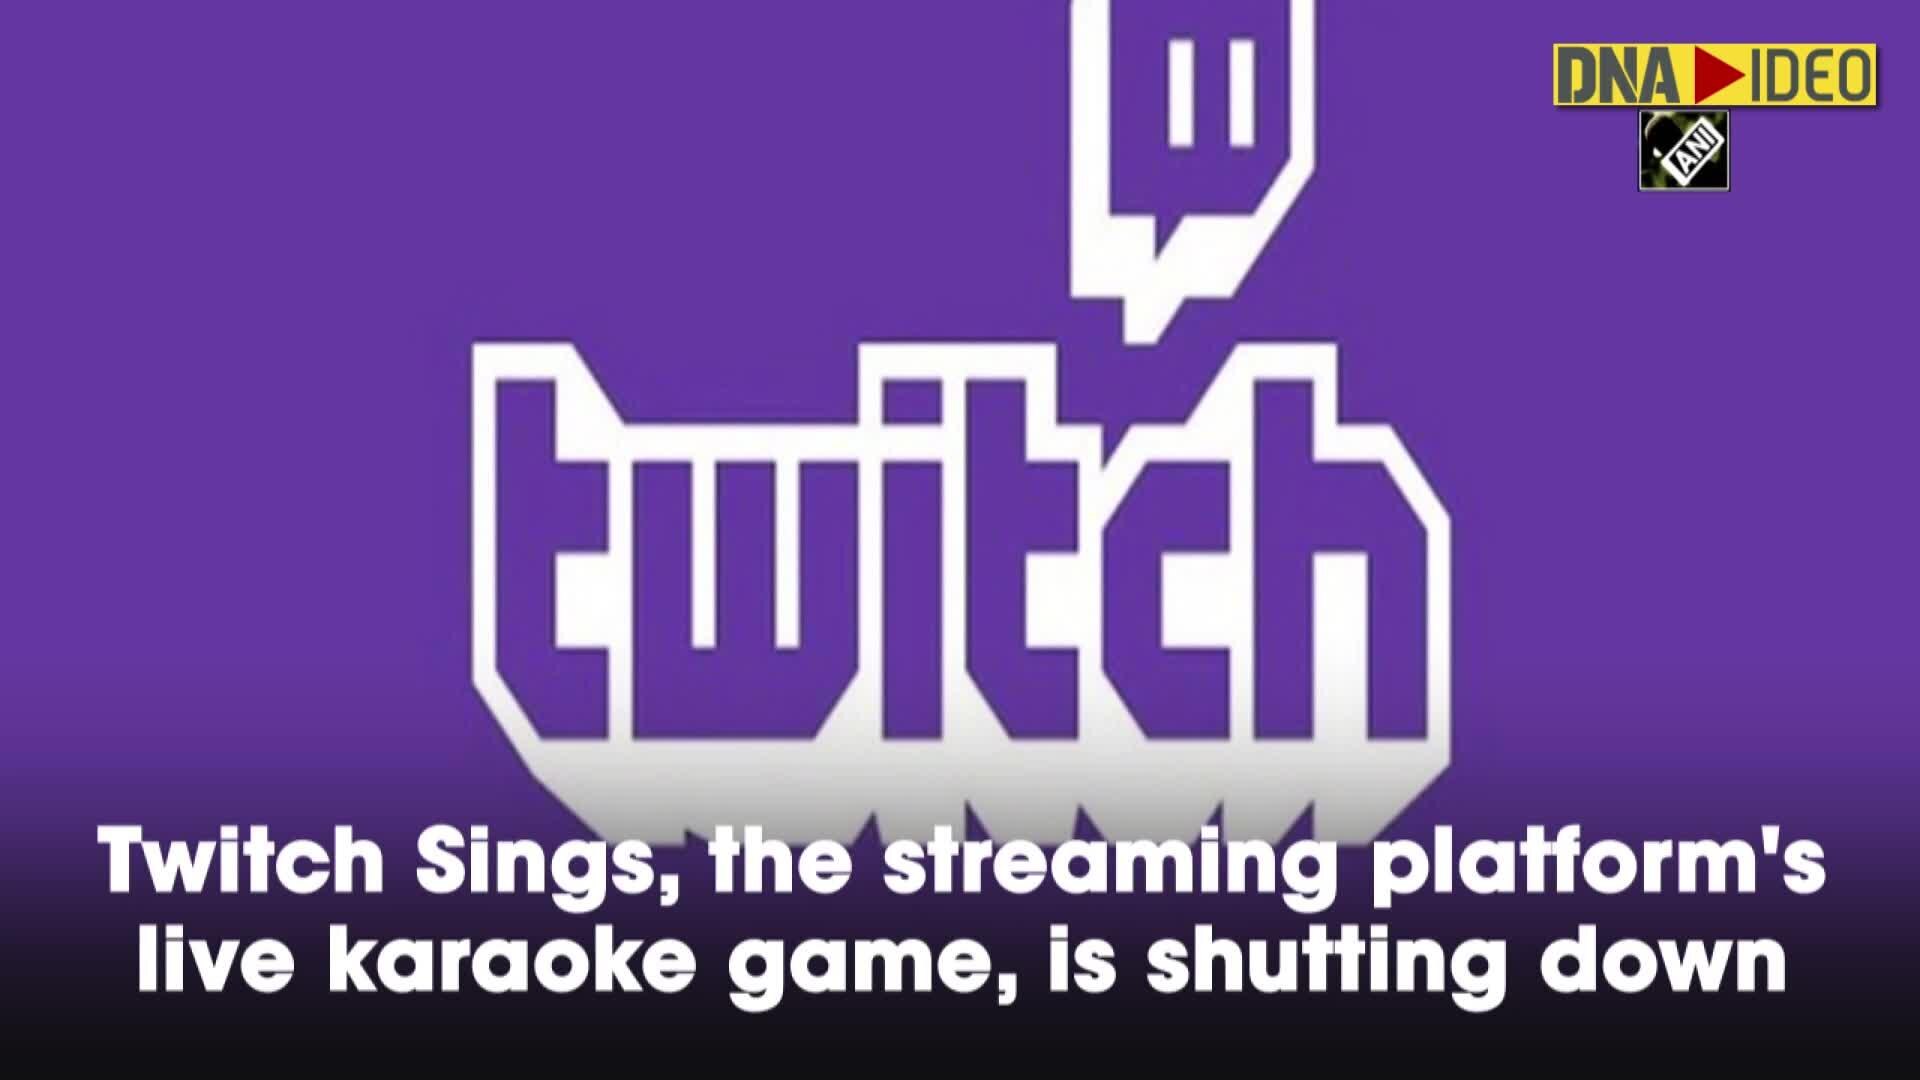 Twitch Sings' karaoke game to shut down by end of this year